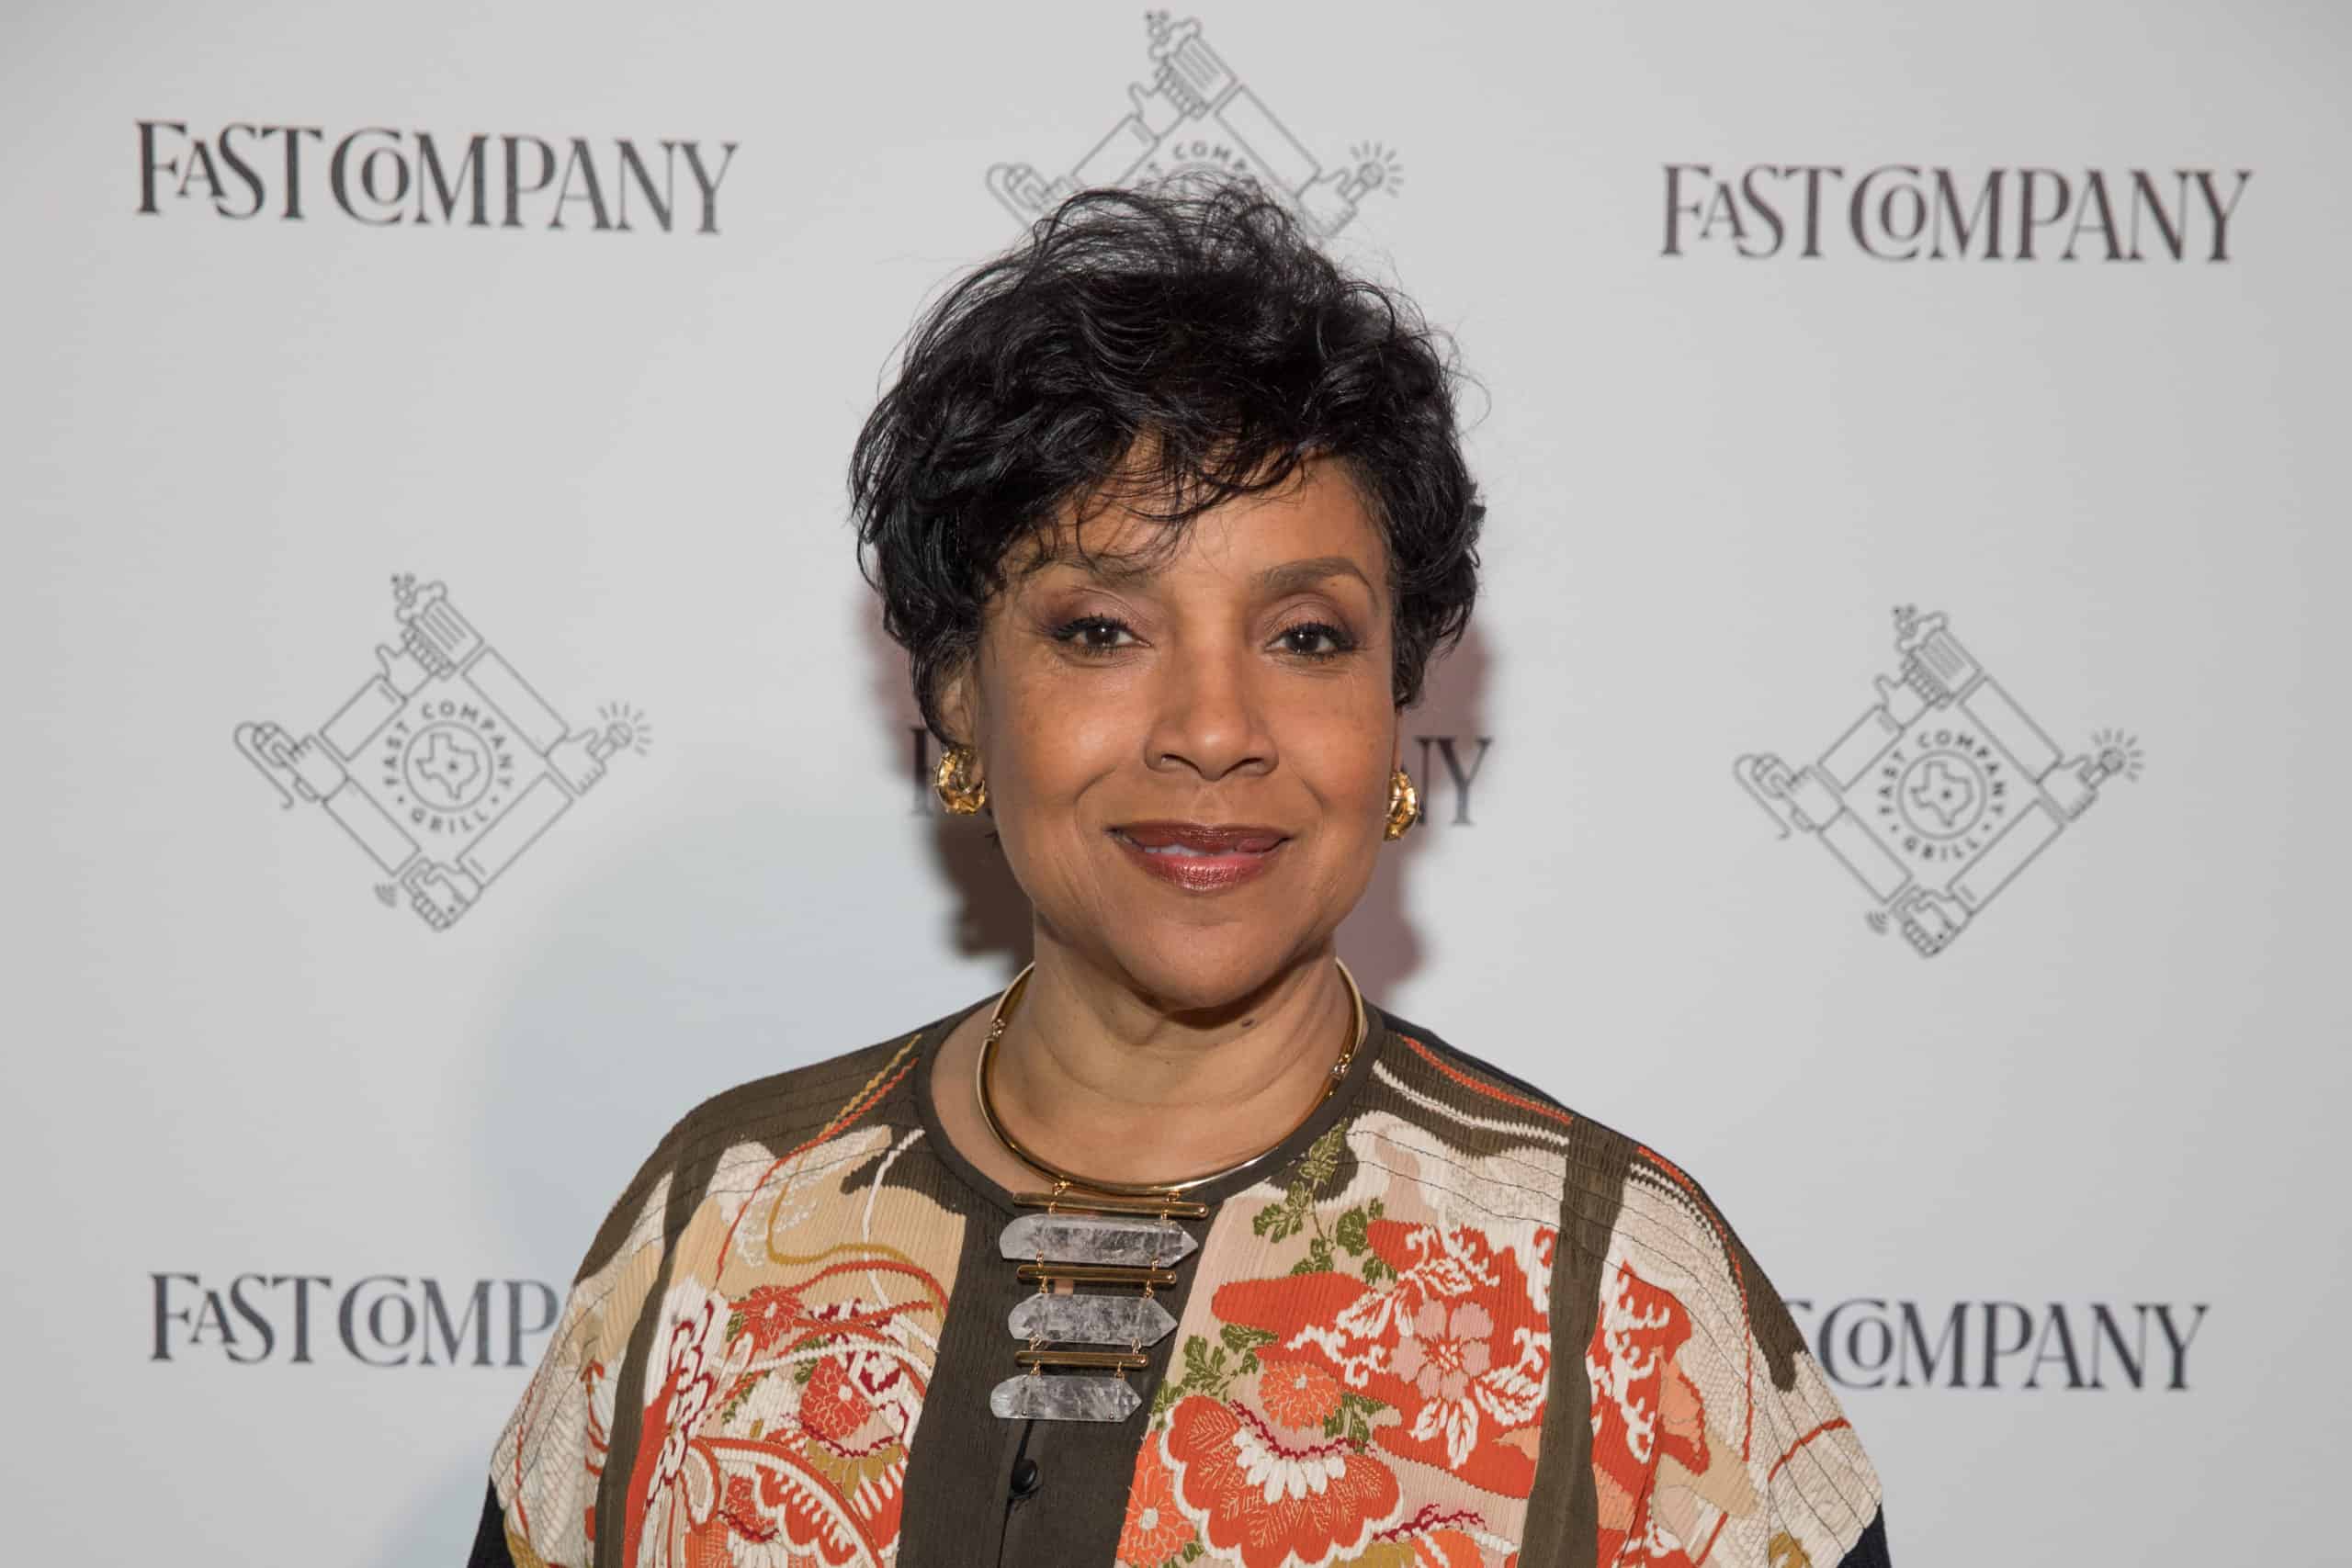 Phylicia Rashad has been named the dean of the college of fine arts at Howard University, where she graduated from in 1970.